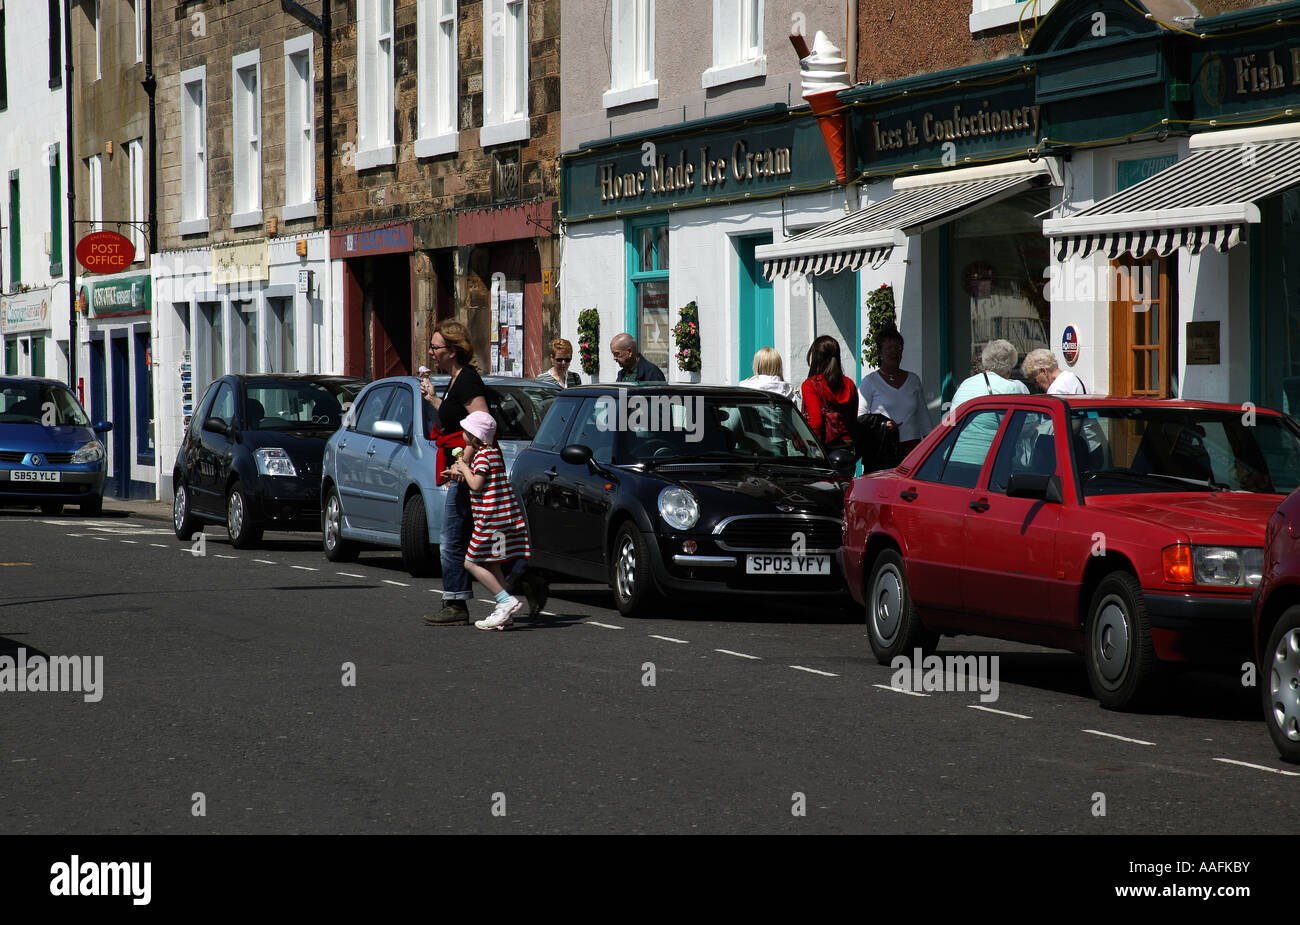 Anstruther High Street, Fife, Scotland Europe with pedestrians crossing and vehicles parked Stock Photo